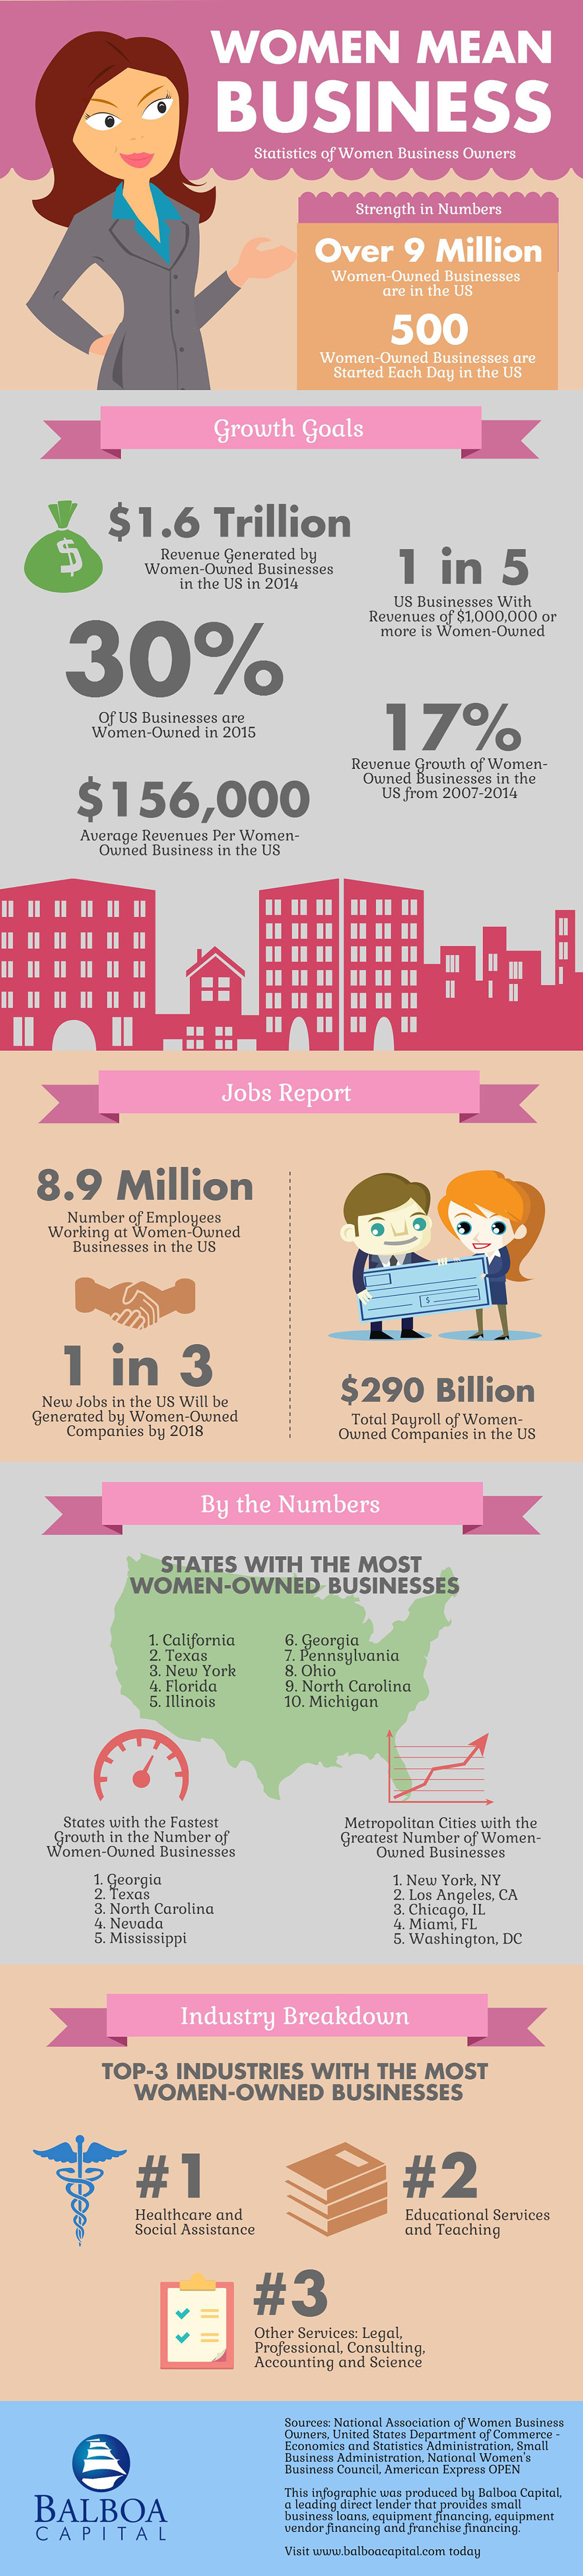 Women Mean Business Infographic